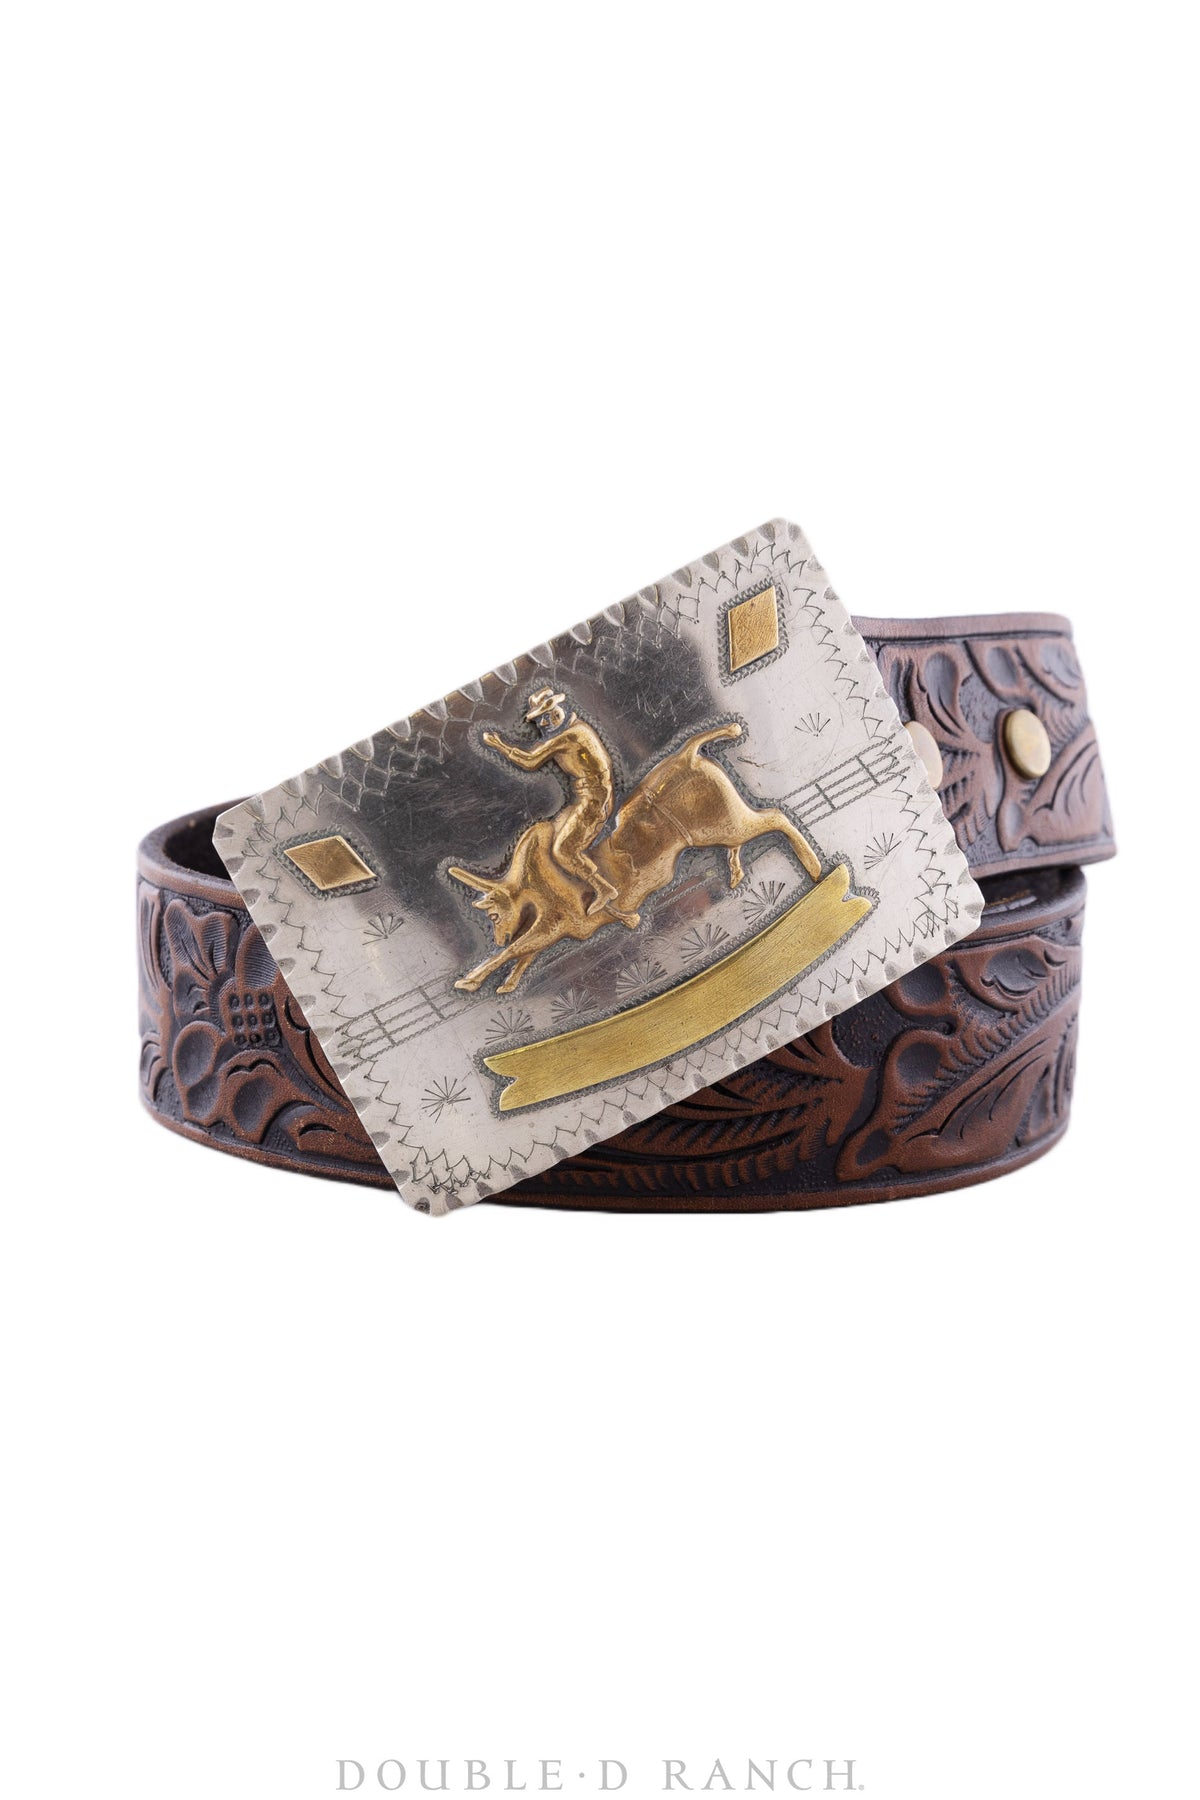 Old Rodeo Belt Buckle of a Bull Rider